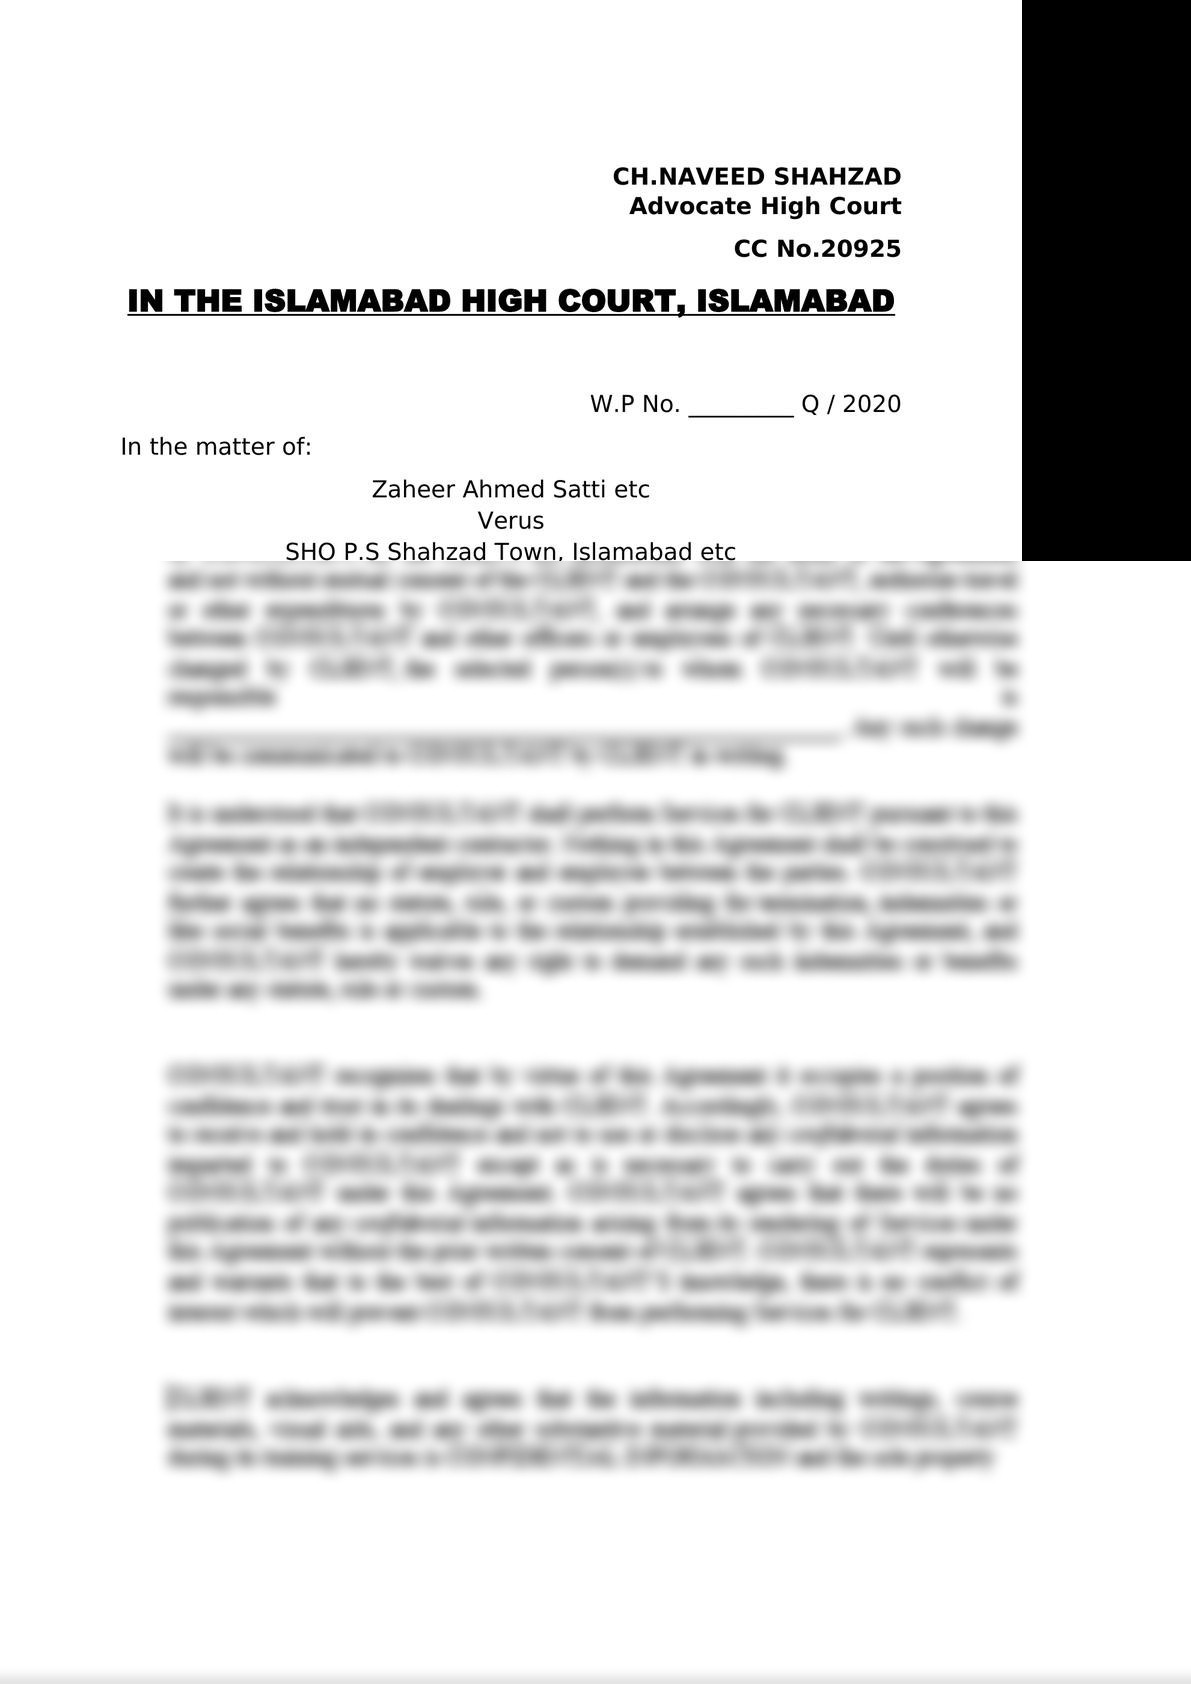 Writ Petition Under Article 199 Of The Constitution Of Pakistan, 1973 For Quashment Of FIR-6